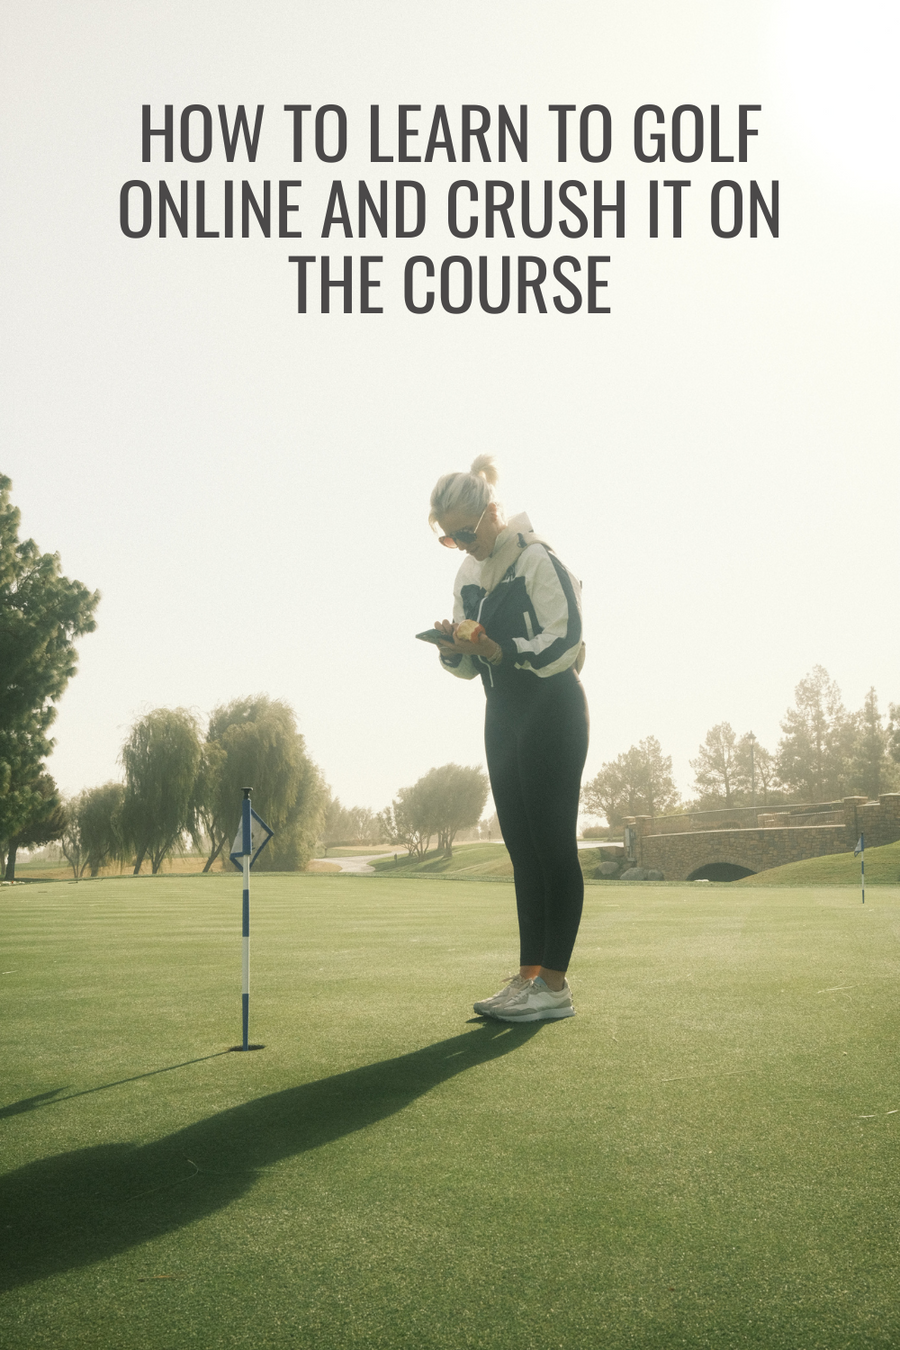 How to Learn to Golf Online and Crush It on the Course